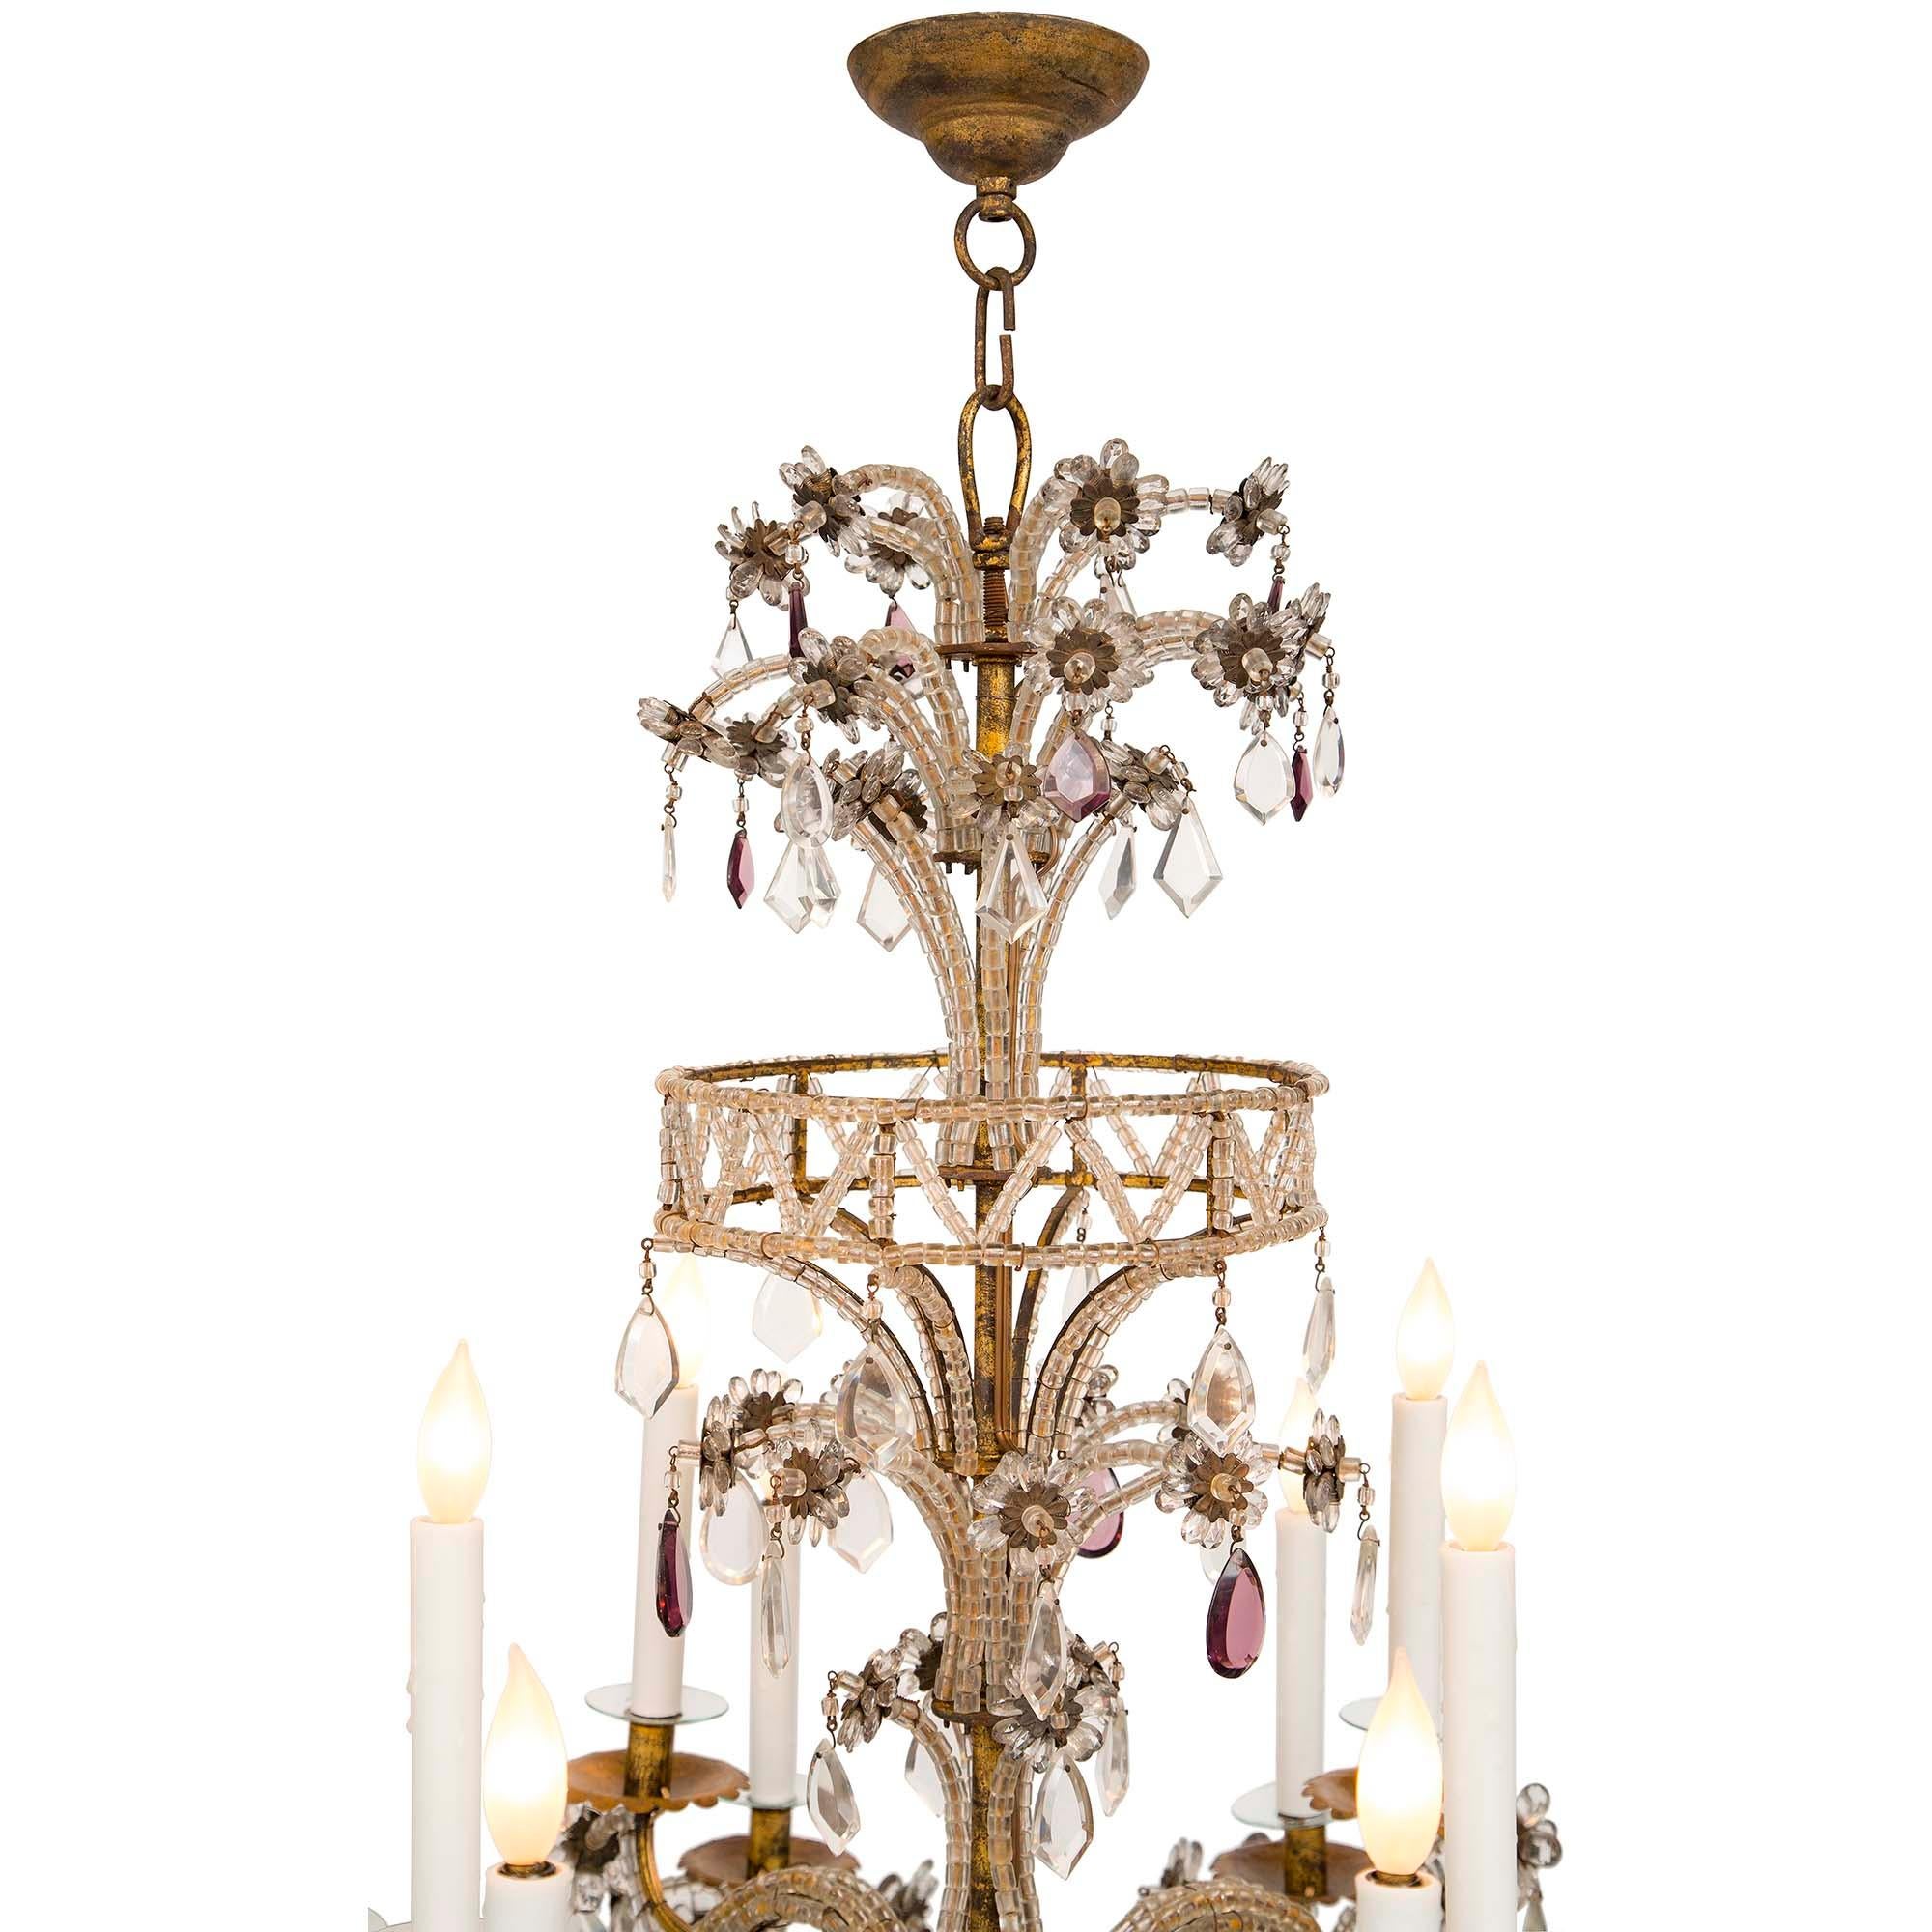 An elegant Italian 19th century gilt metal, crystal and glass twelve arm chandelier. The chandelier is centered by a solid crystal bottom ball amidst striking cut clear and violet colored crystals. Each of the finely scrolled arms are adorned with